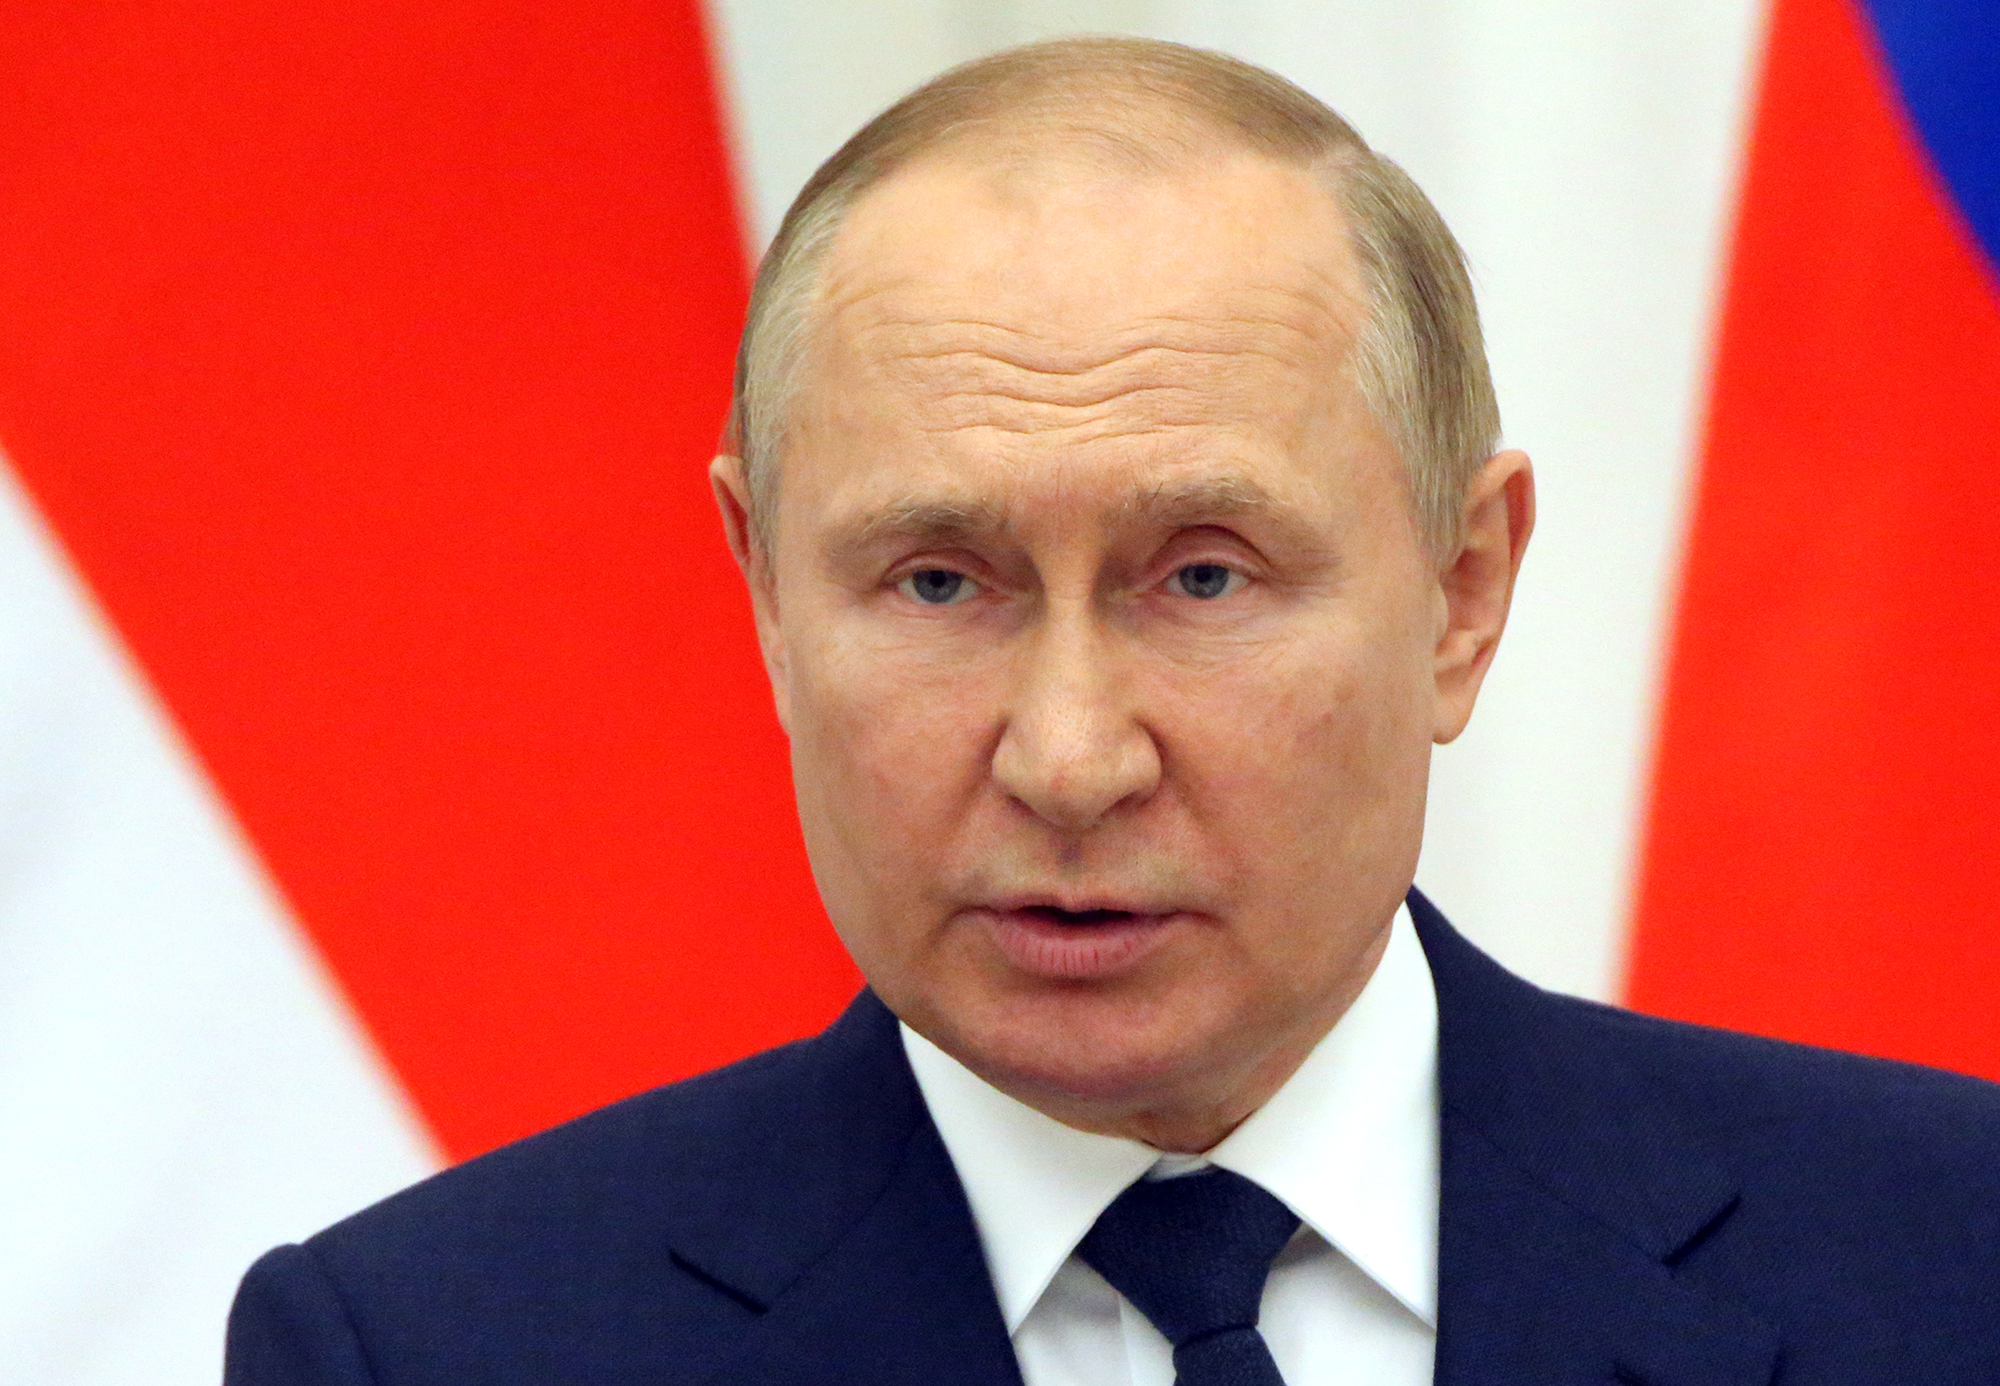 Putin says war could continue until ‘the last Ukrainian is left standing’